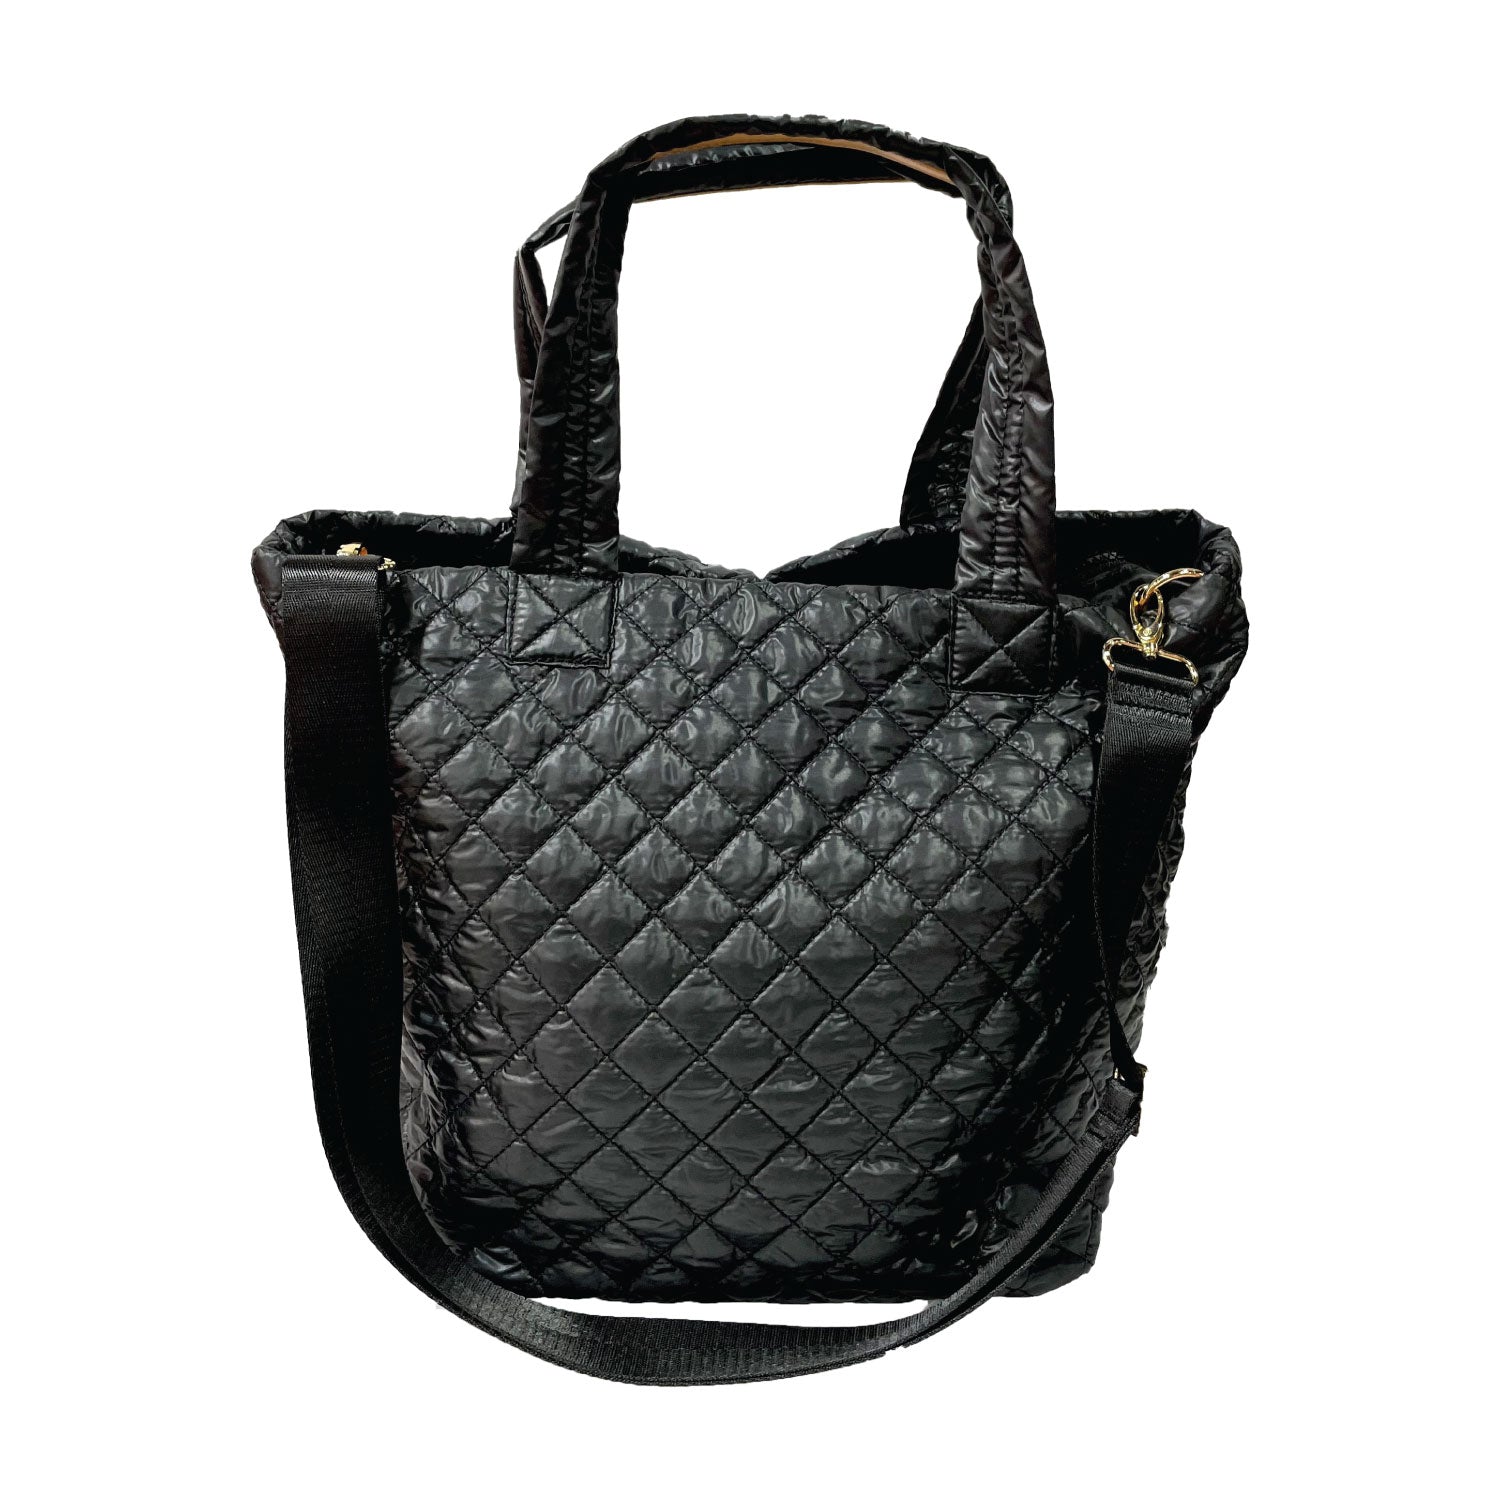 Luxury Designer Quilted Messenger Black Leather Handbag With Chain Strap  For Women High Quality Tote, Shoulder, And Crossbody Bag By LOULOU PUFFER  From Dhgate1caitou2, $75.07 | DHgate.Com